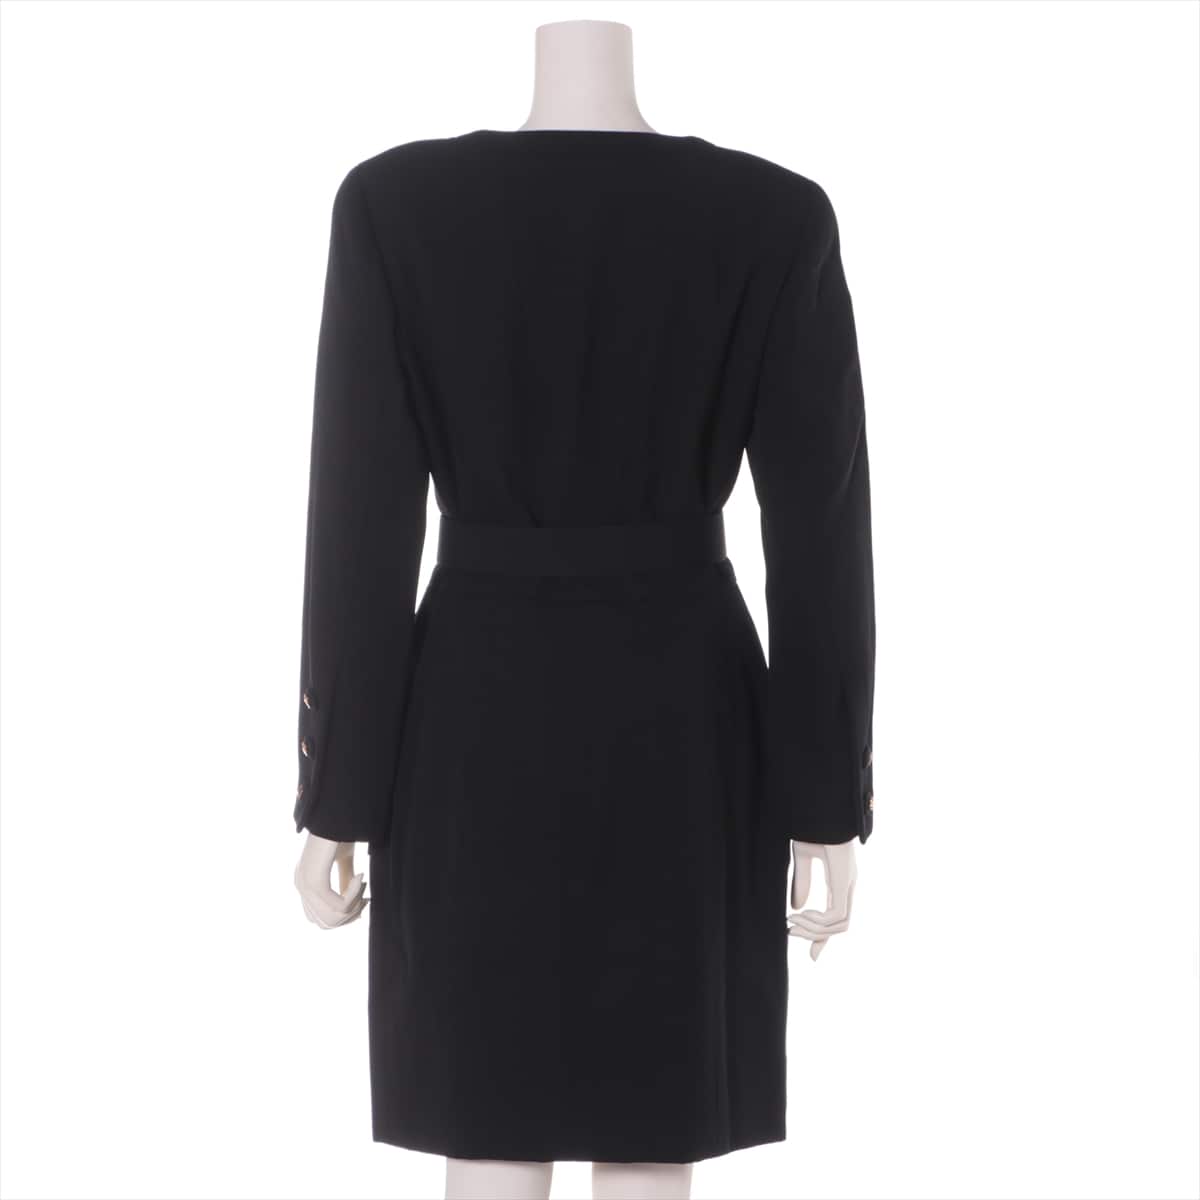 Chanel Unknown material Dress Unknown size Ladies' Black No sign tag